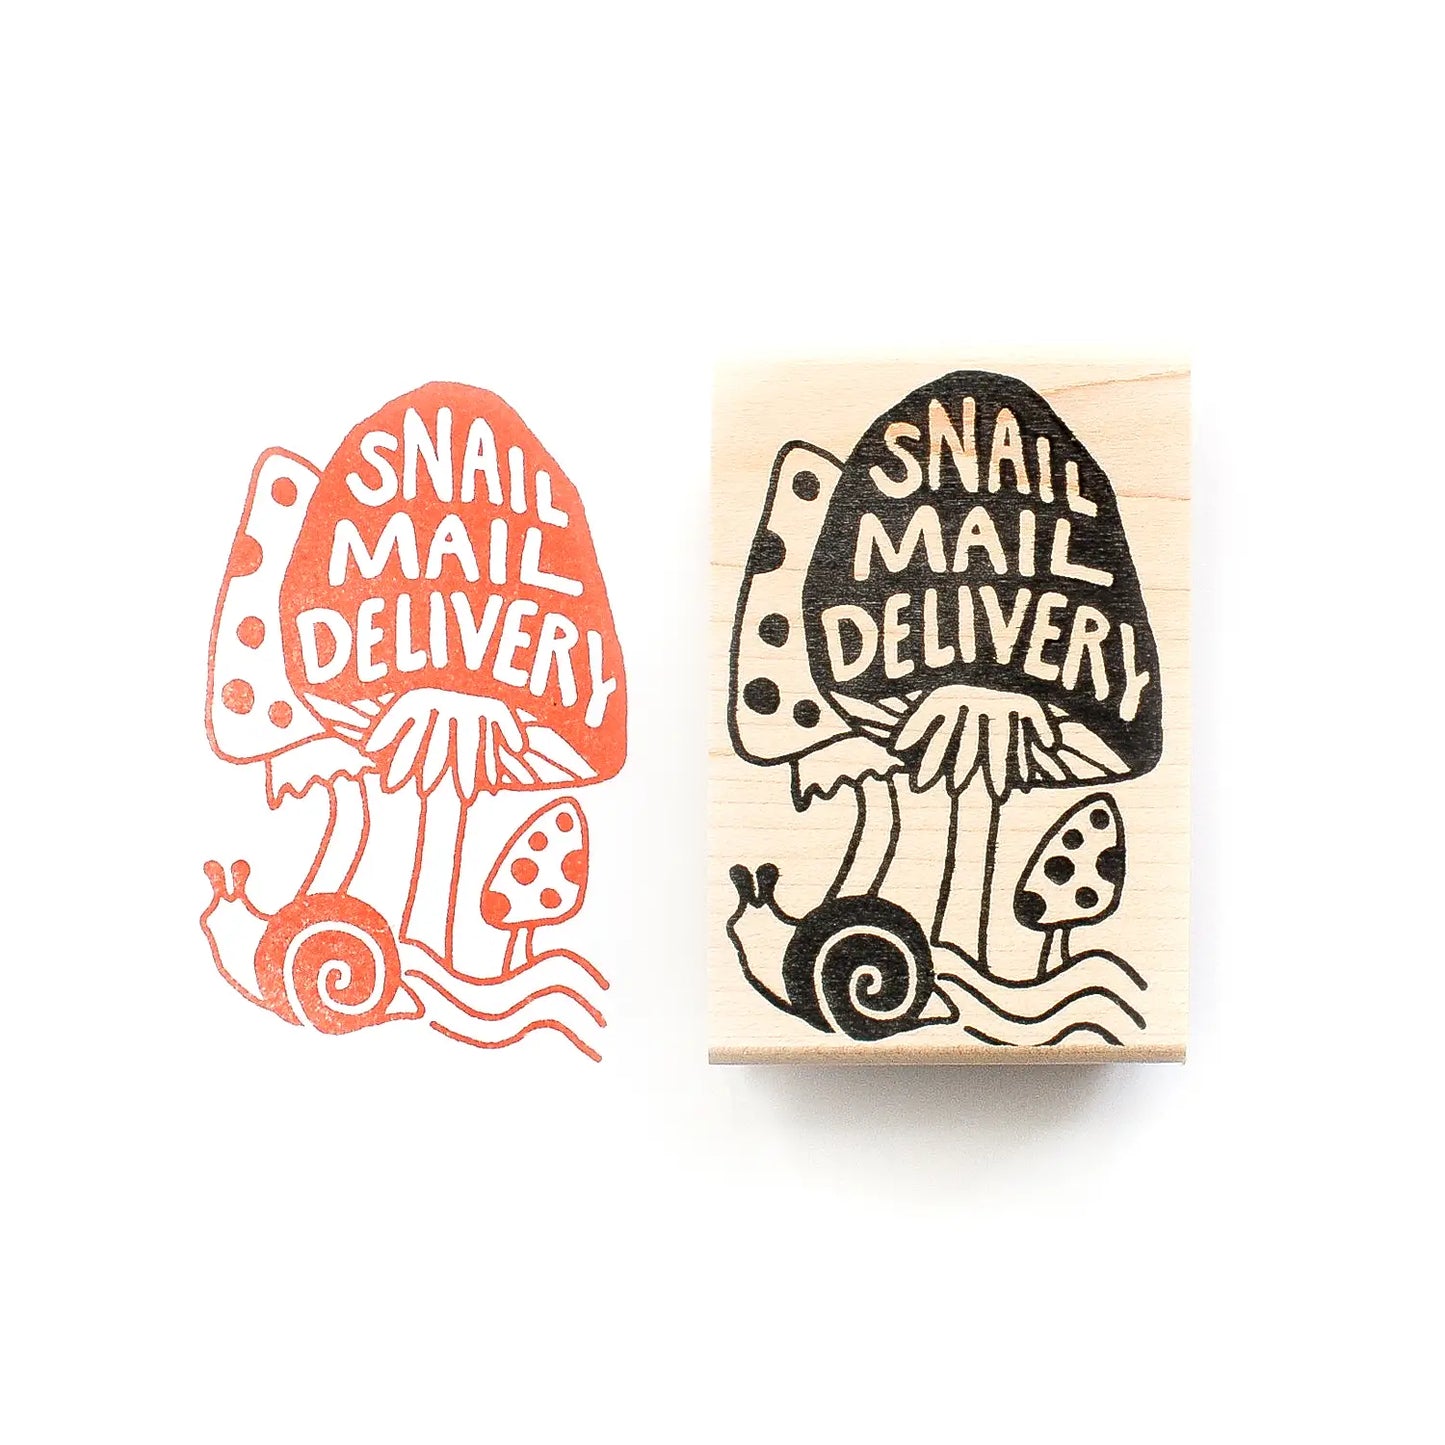 SNAIL MAIL DELIVERY rubber stamp, Peppercorn Paper, The Olde Curiosity Shoppe